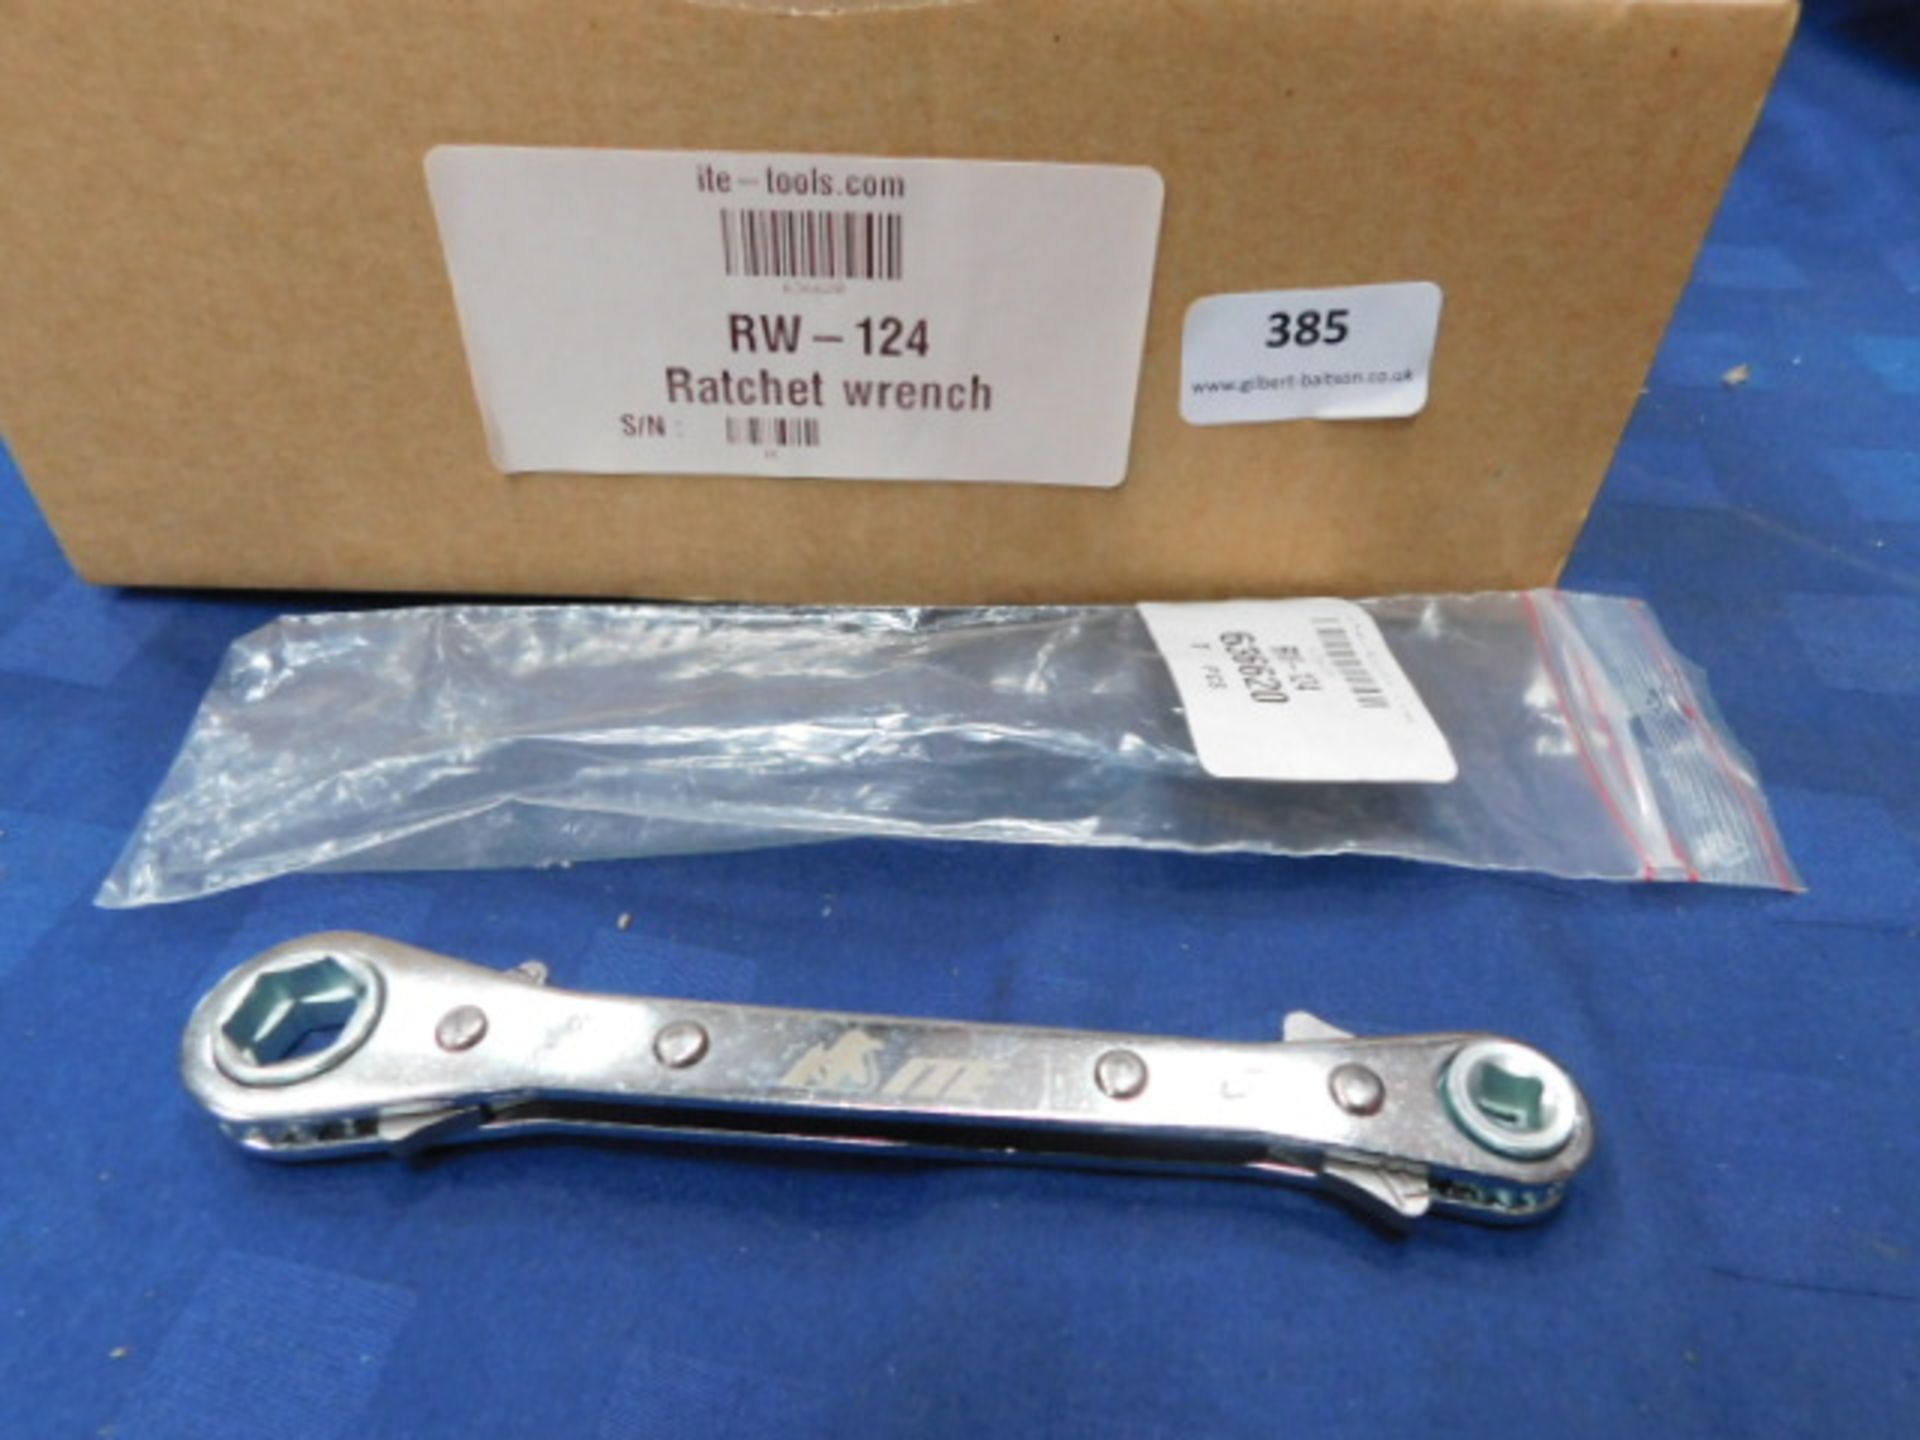 * RW-124 Ratch.wrench 1/4 3/16 9/16 1/2Hex